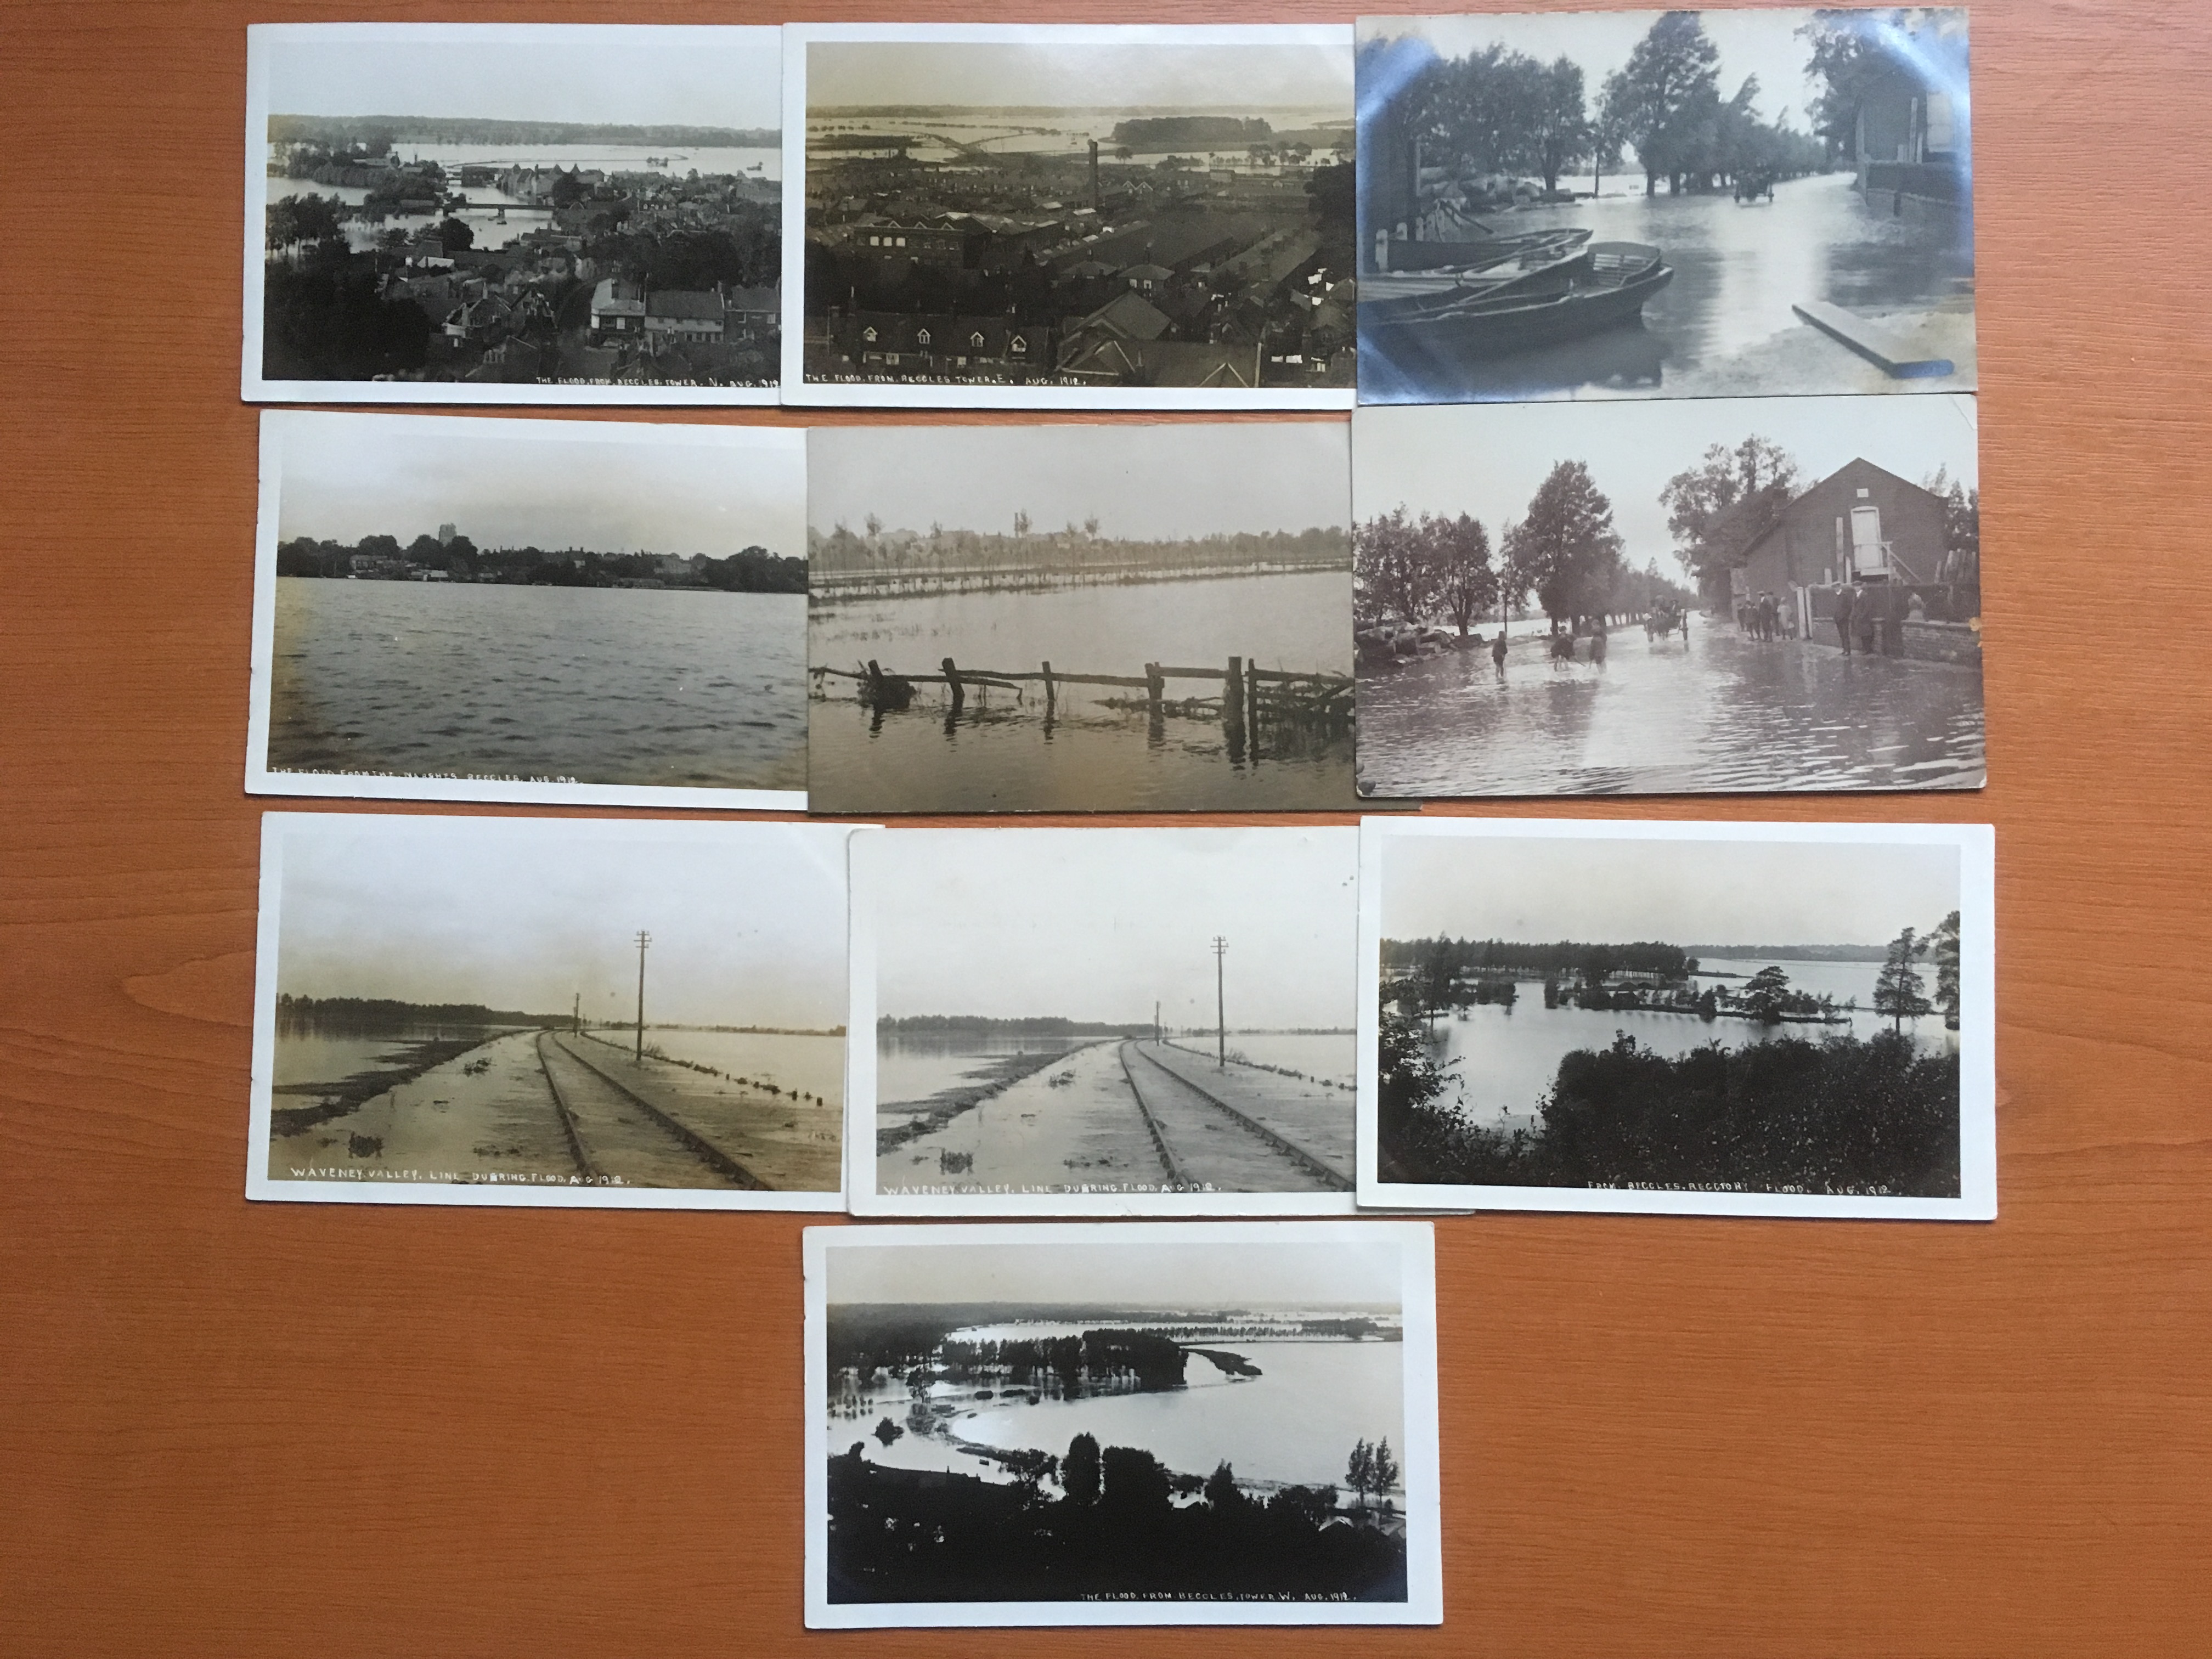 SUFFOLK: BECCLES: RP POSTCARDS SHOWING 1912 FLOODS INCLUDING WAVENEY VALLEY RAILWAY LINE, MARSHES,